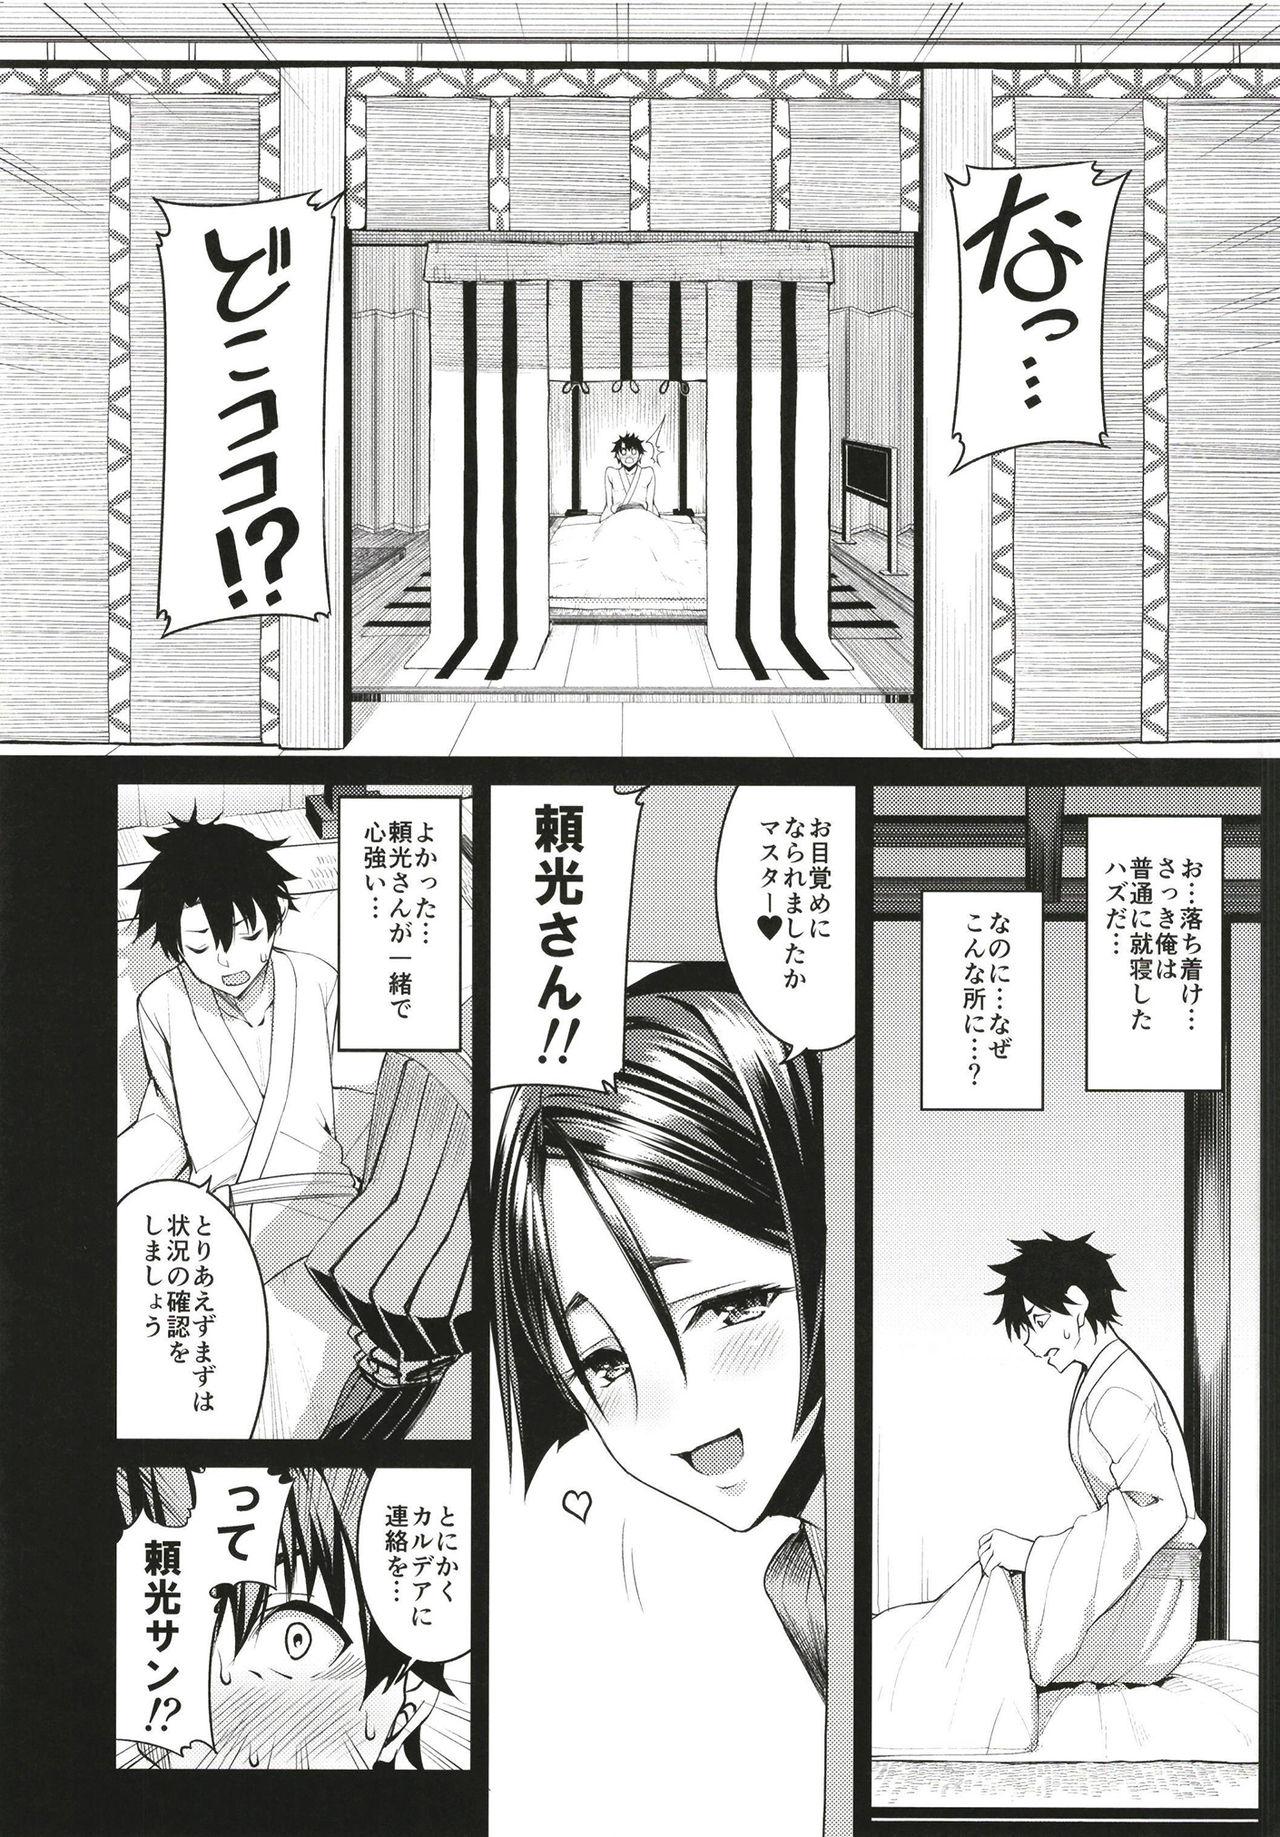 Boy Fuck Girl Another Personality - Fate grand order Bangkok - Page 5